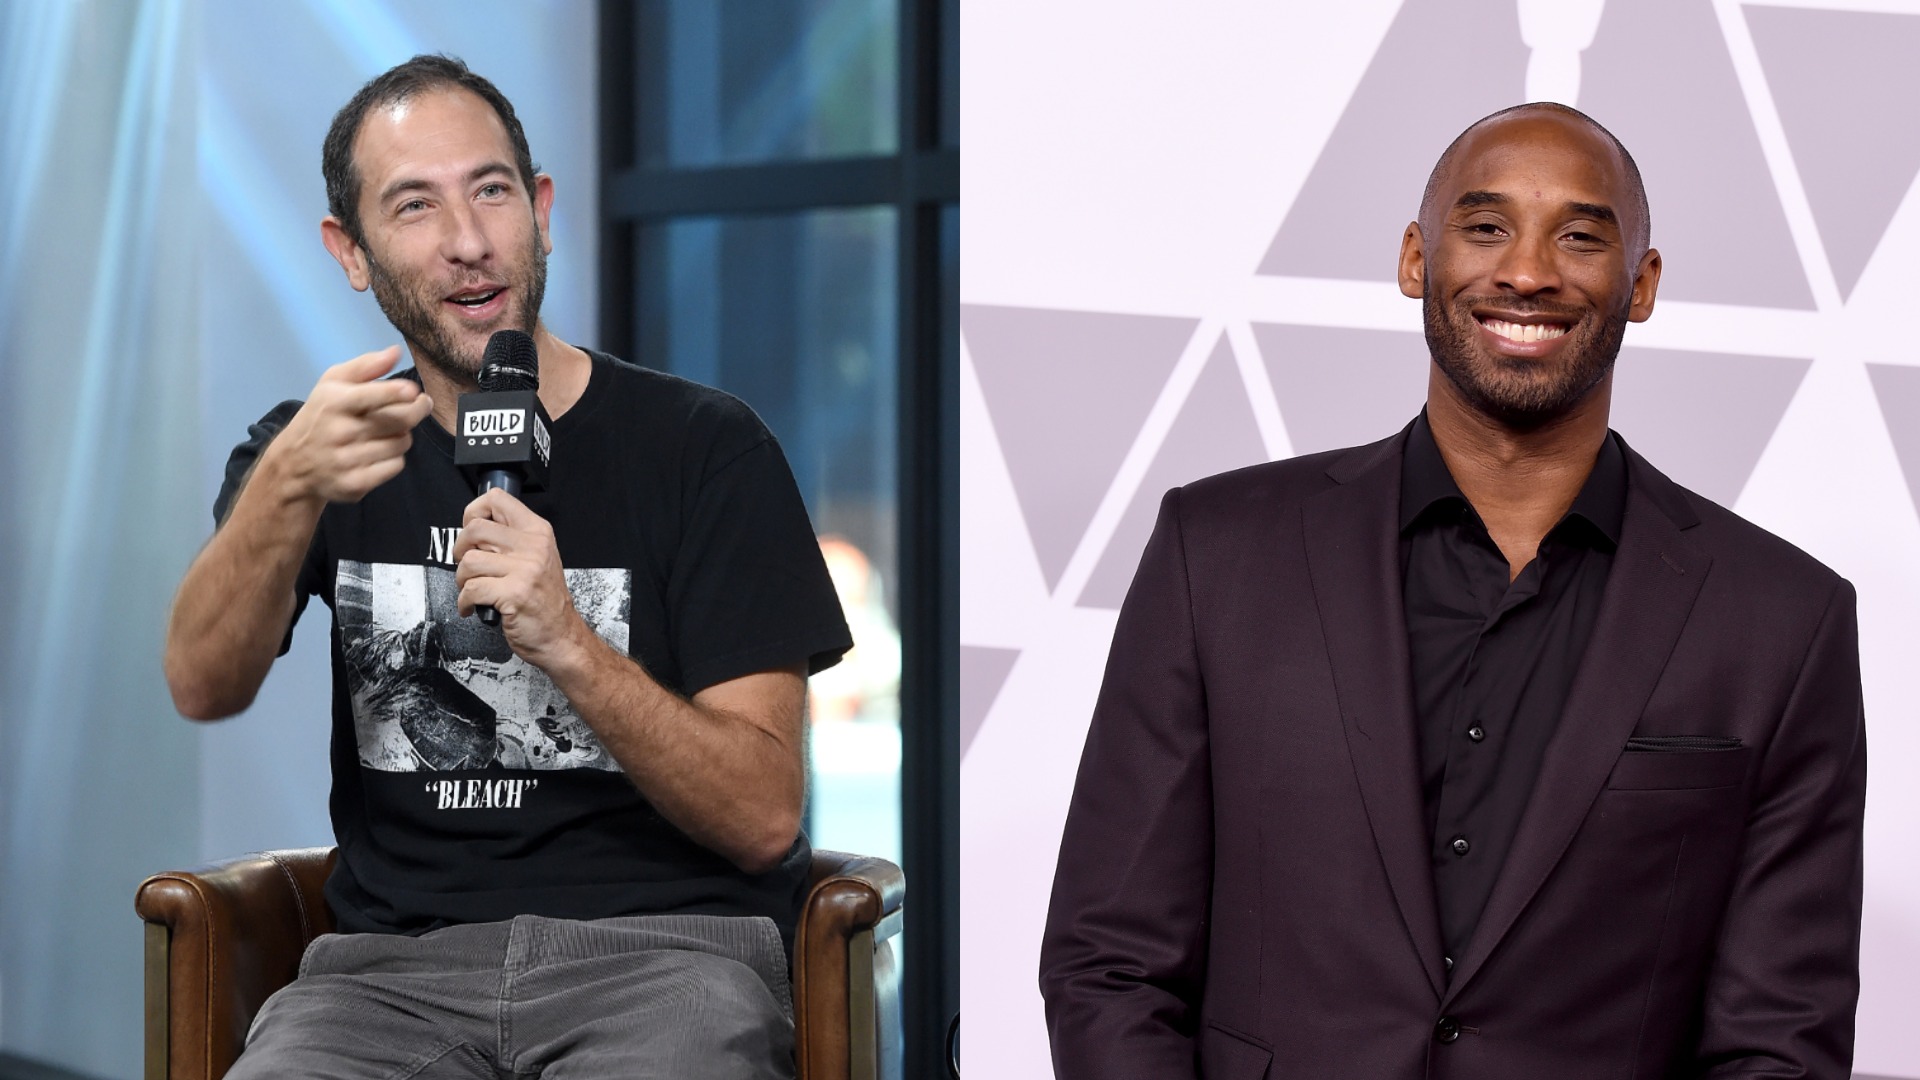 Kobe S Death Is The One Thing You Can T Joke About According To Comedians